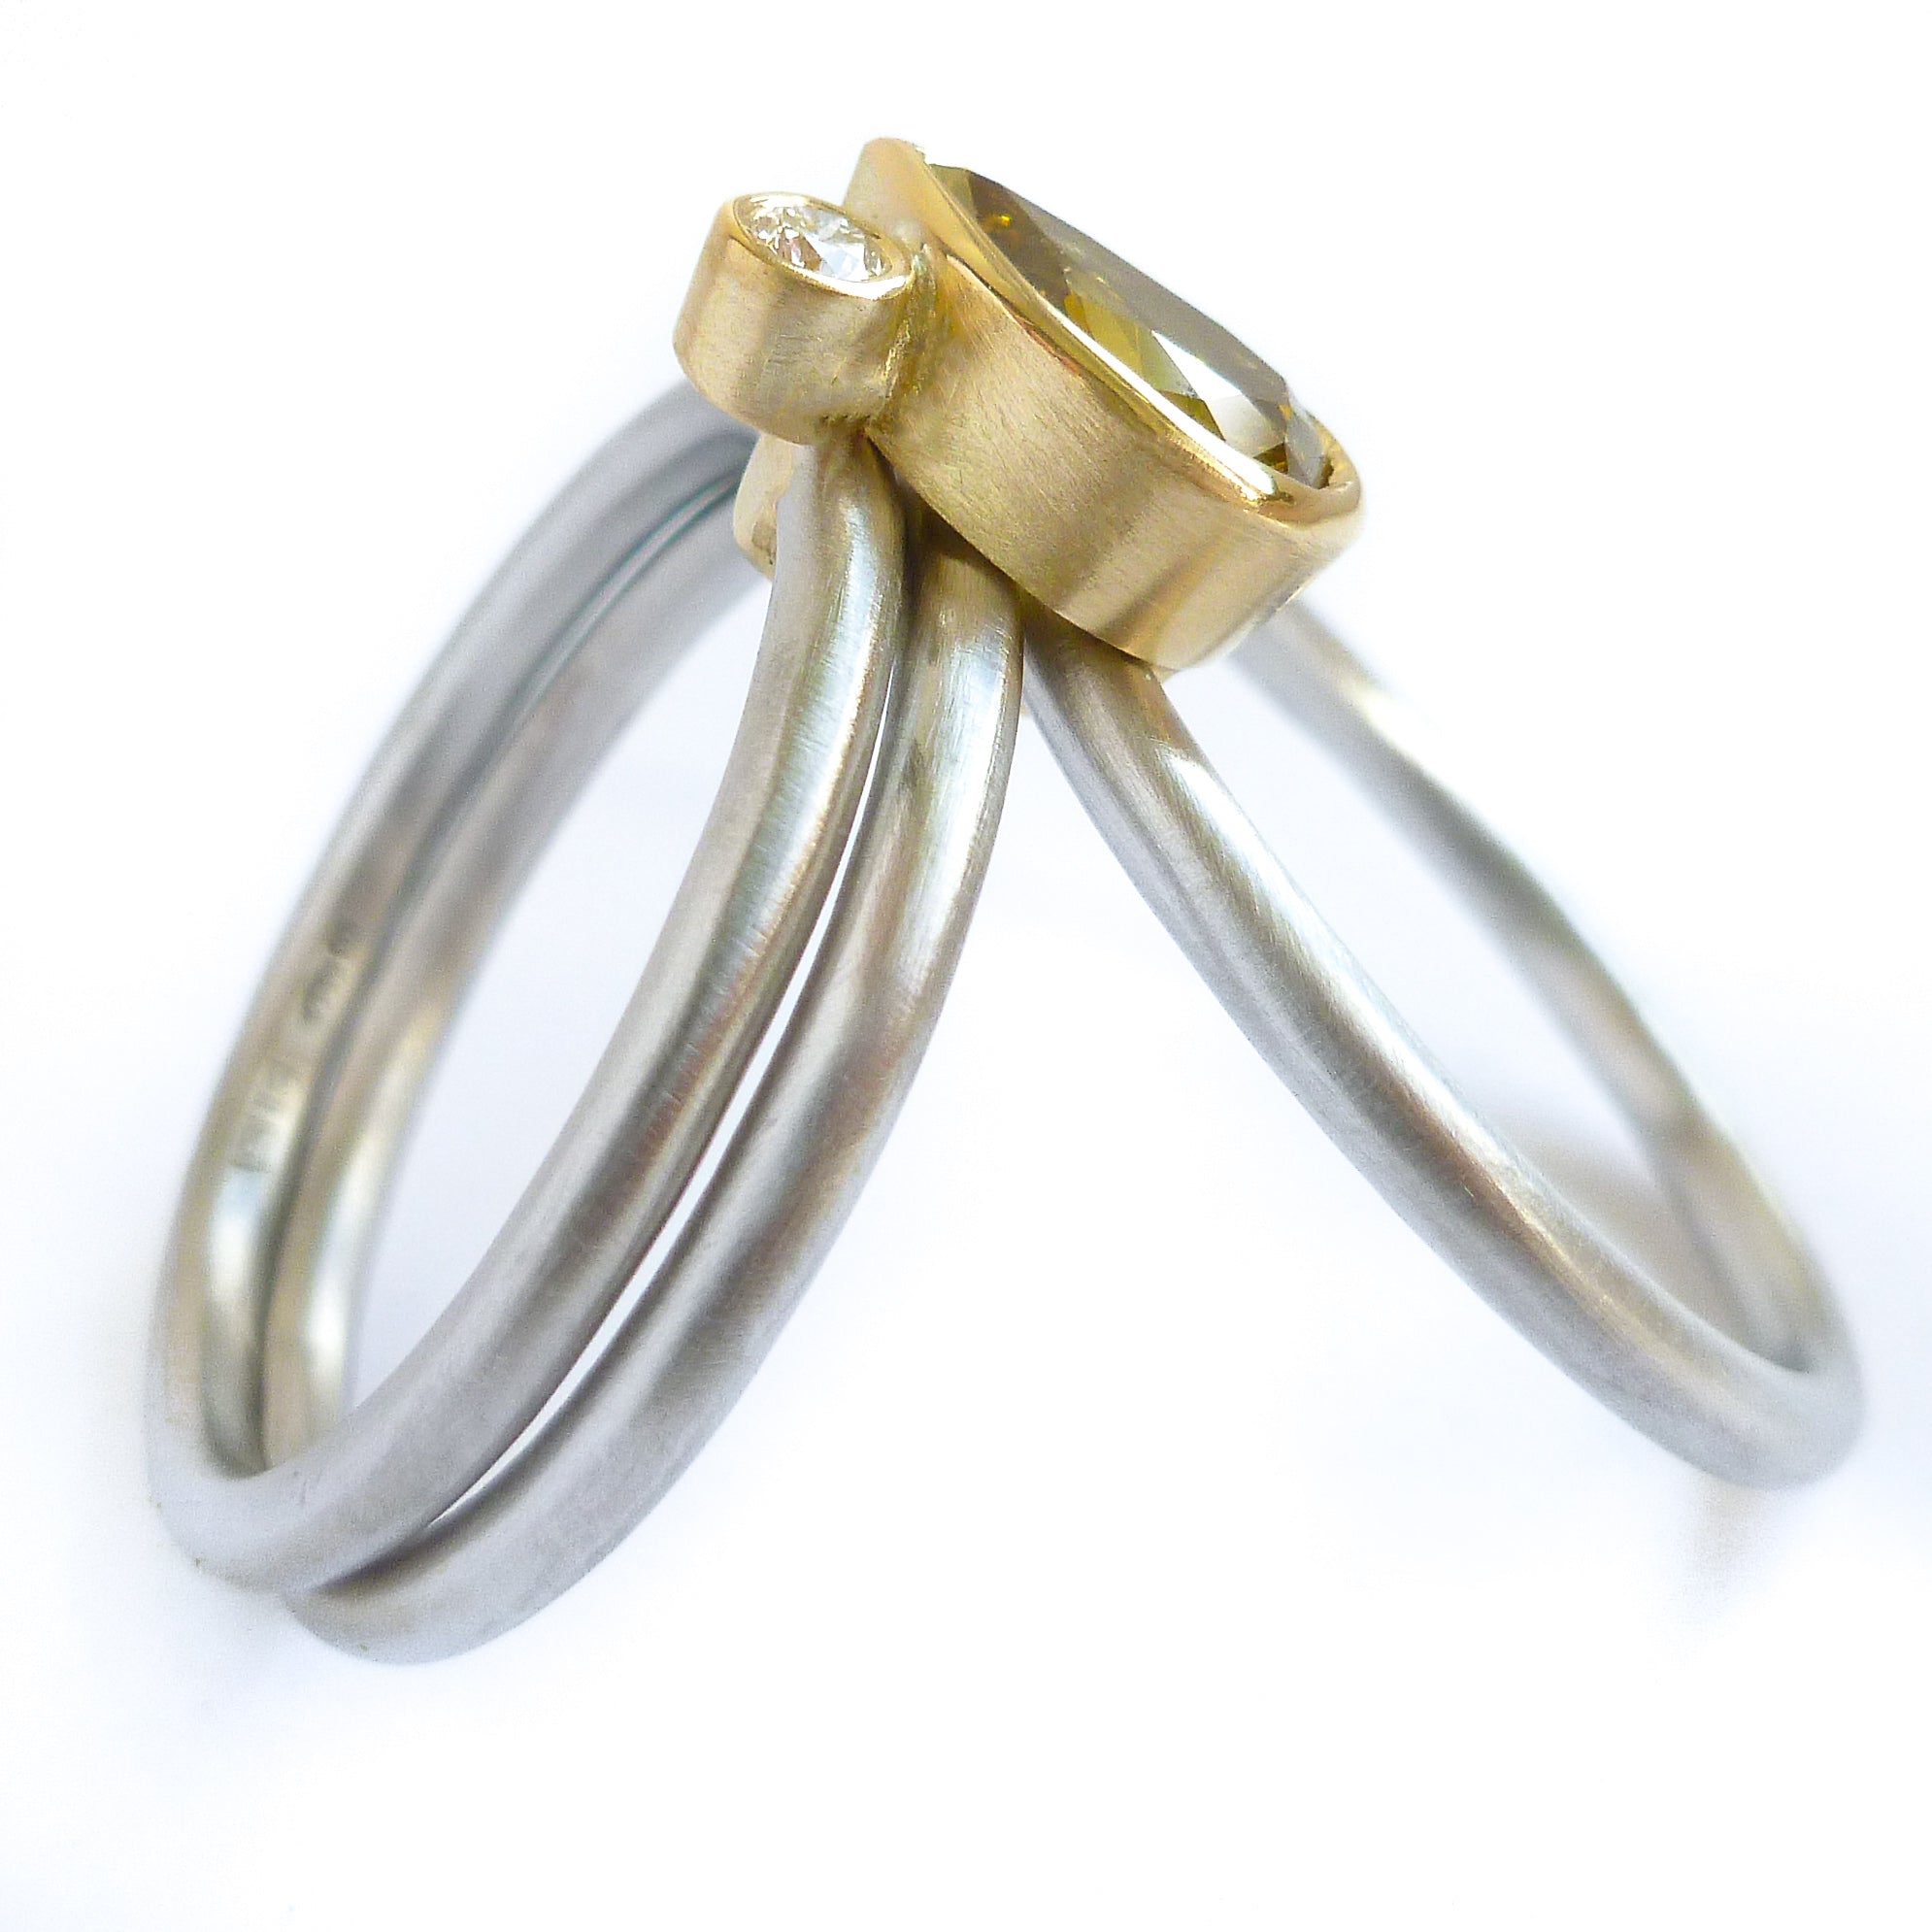 Platinum, 18ct Gold, Champagne And White Diamond Ring. Contemporary, Bespoke, Sue Lane. Multi band ring or interlocking ring, sometimes called triple band rings too.